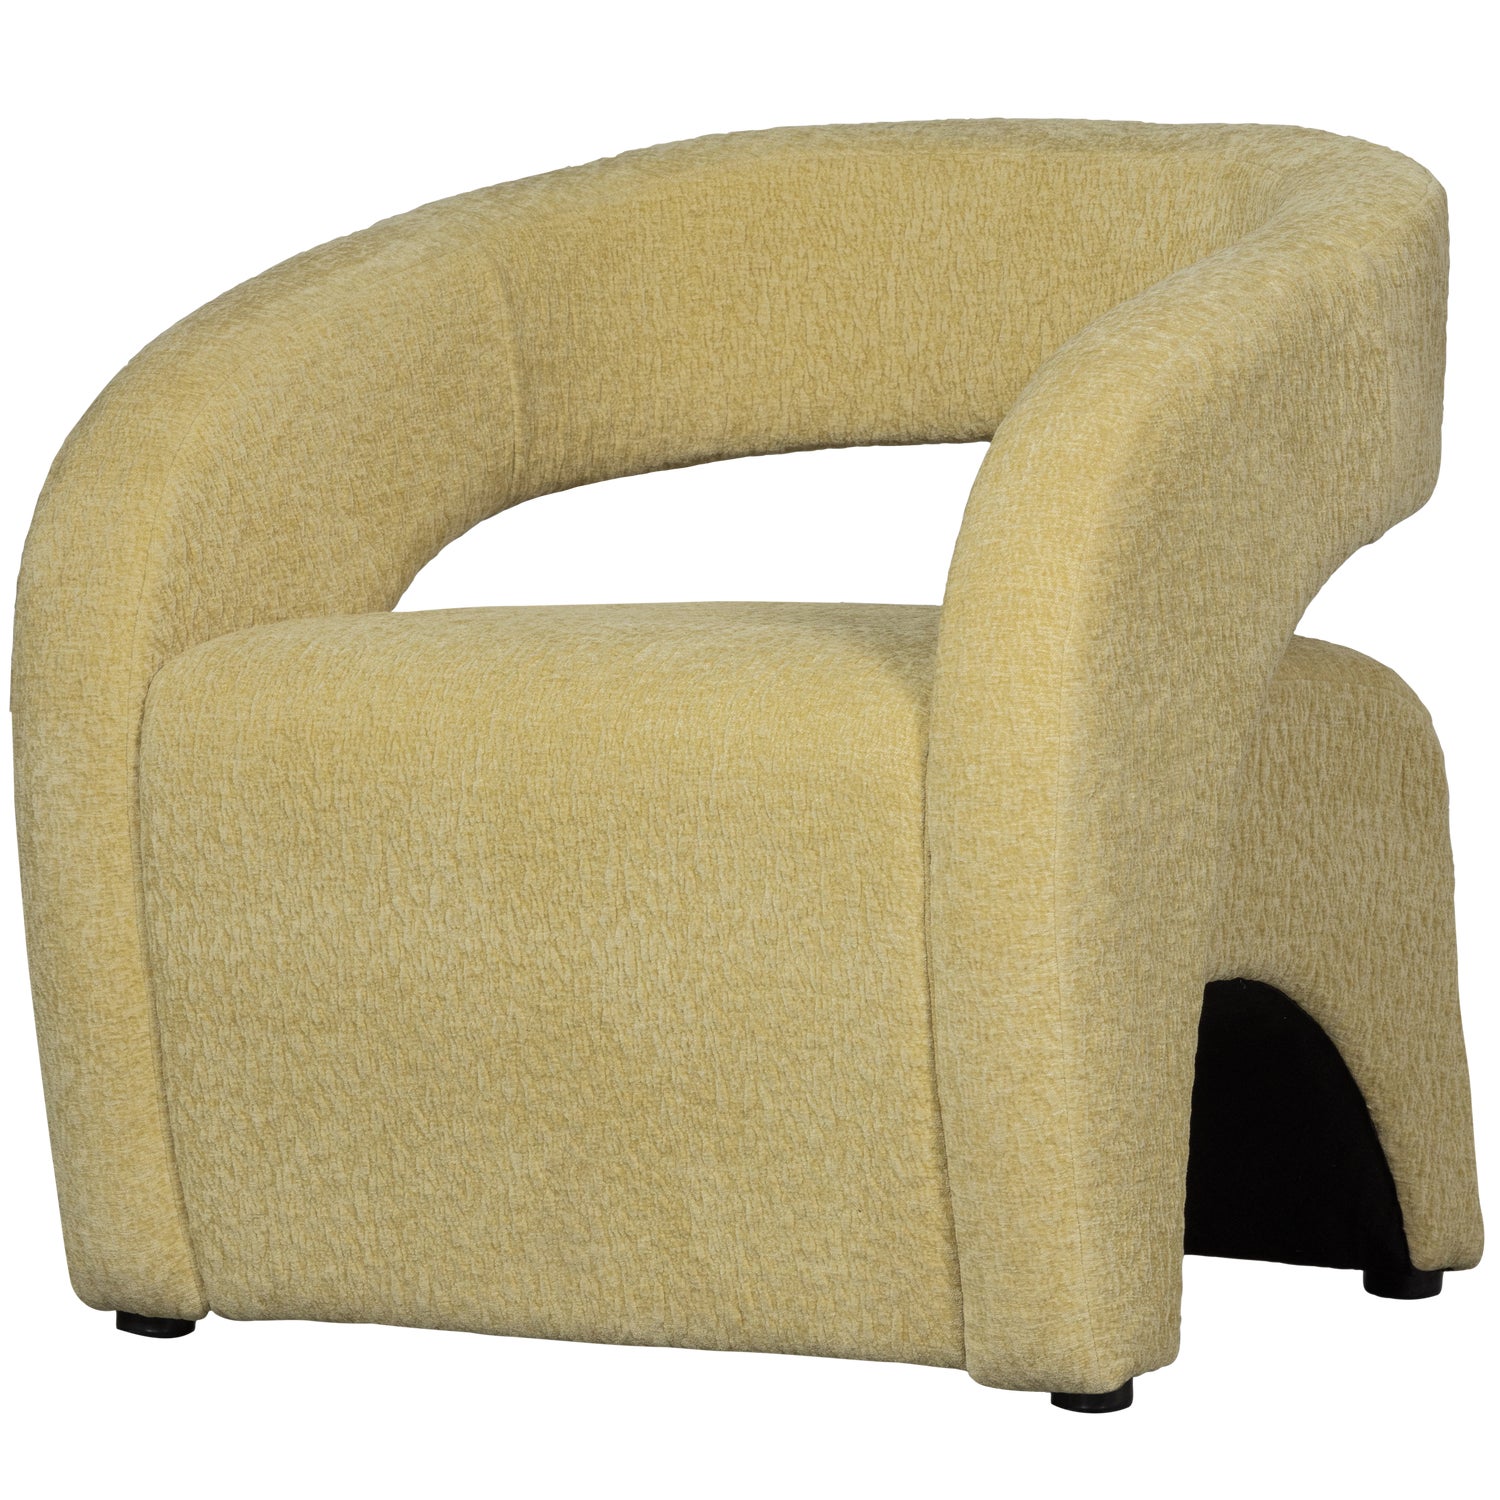 801432-L-02_VS_BP_Radiate_fauteuil_textured_lime_SA.png?auto=webp&format=png&width=1500&height=1500